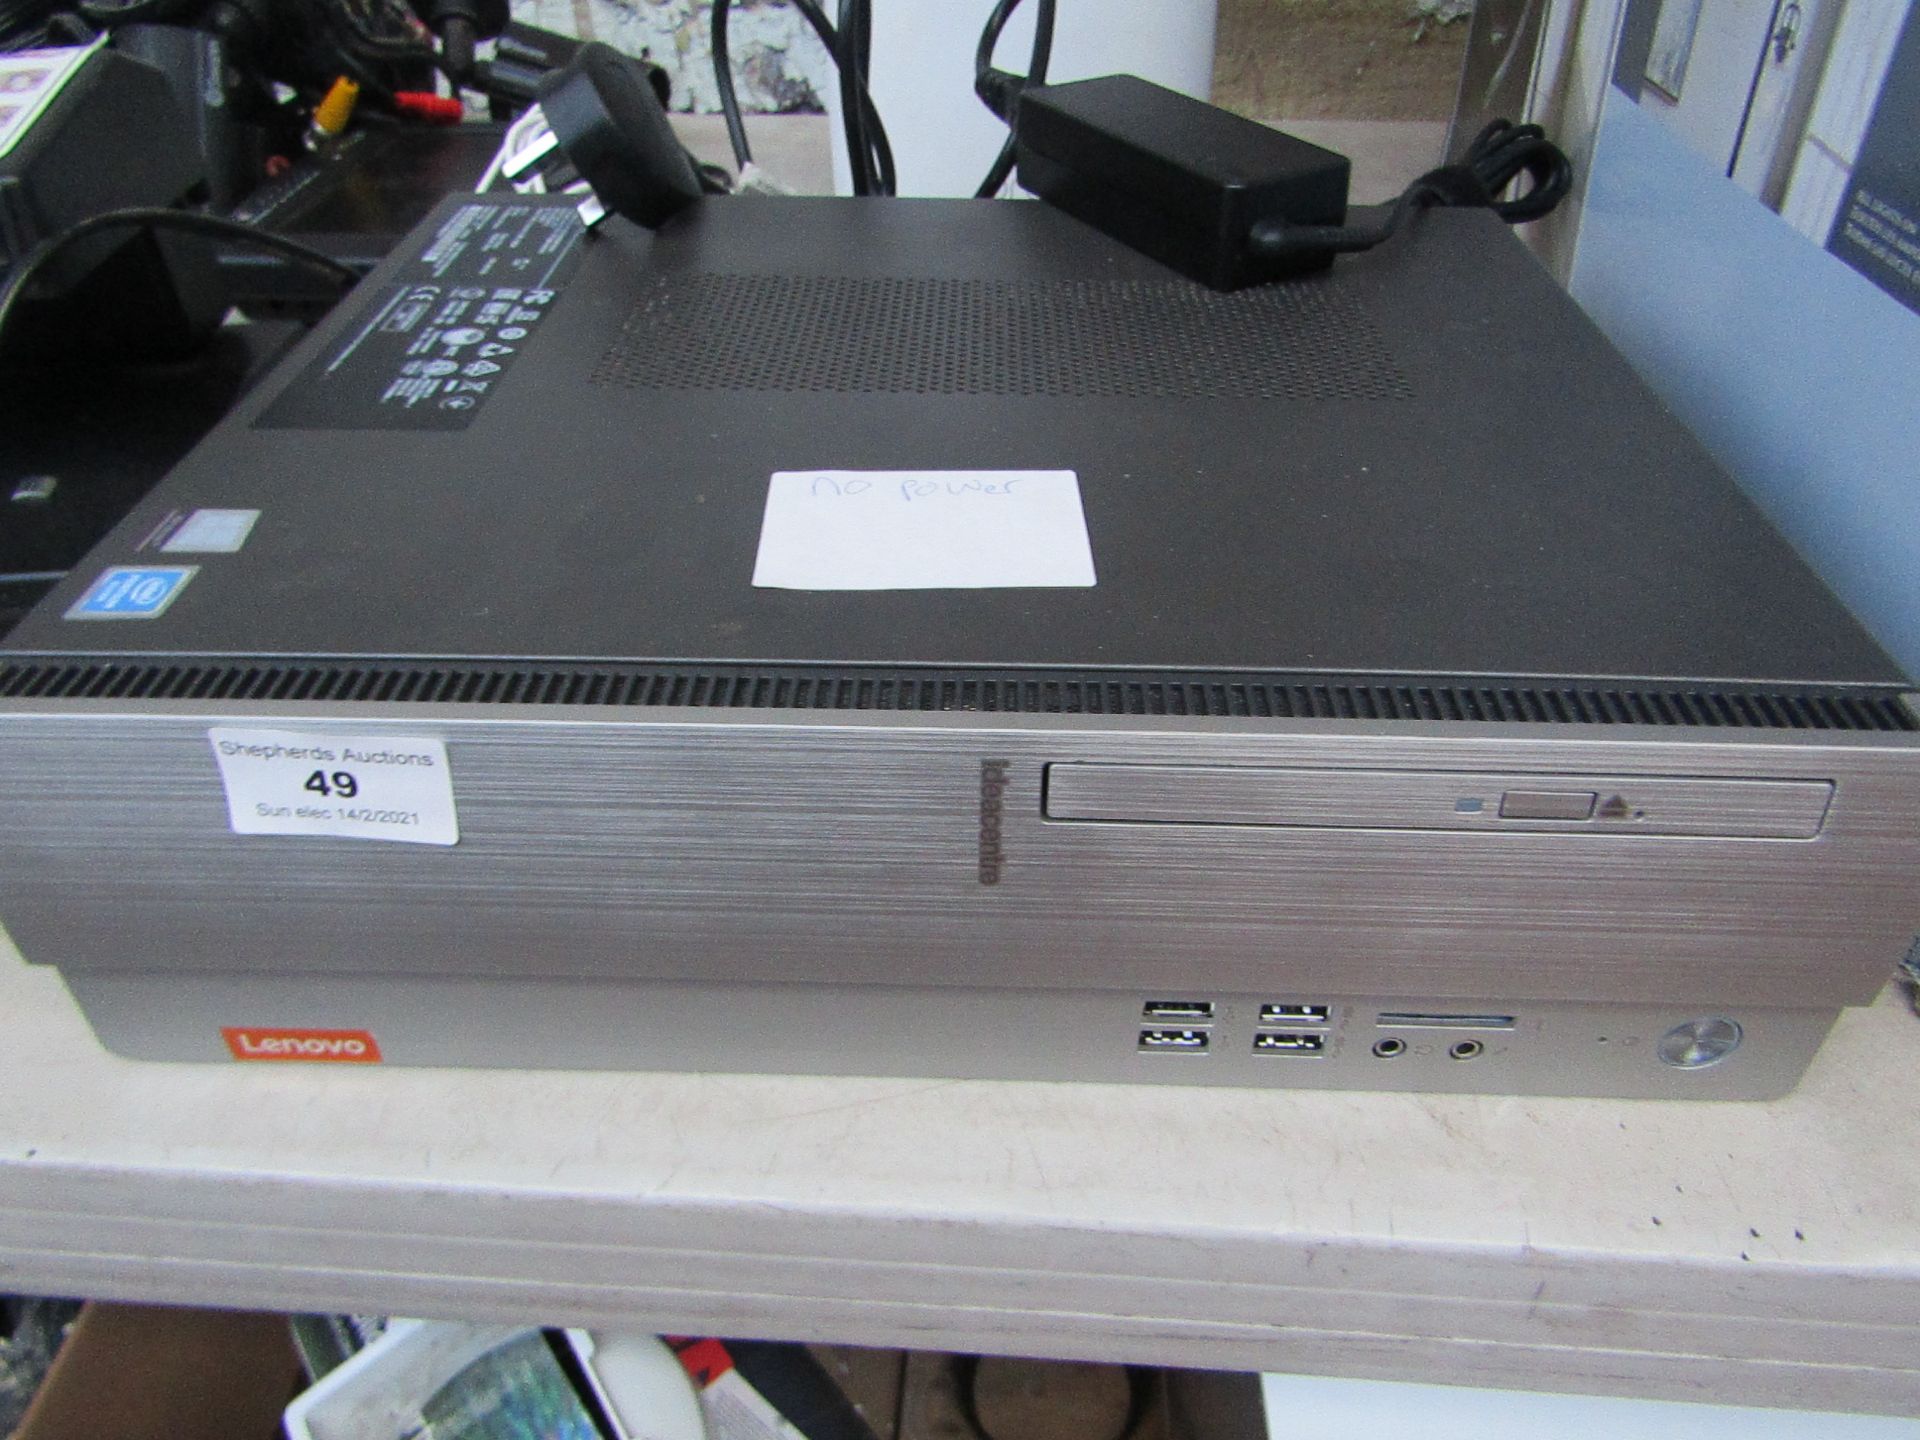 Lenovo HDD 1T, RAM 8G, Windows 10 Home compiter tower, no power but we have not tested it to a